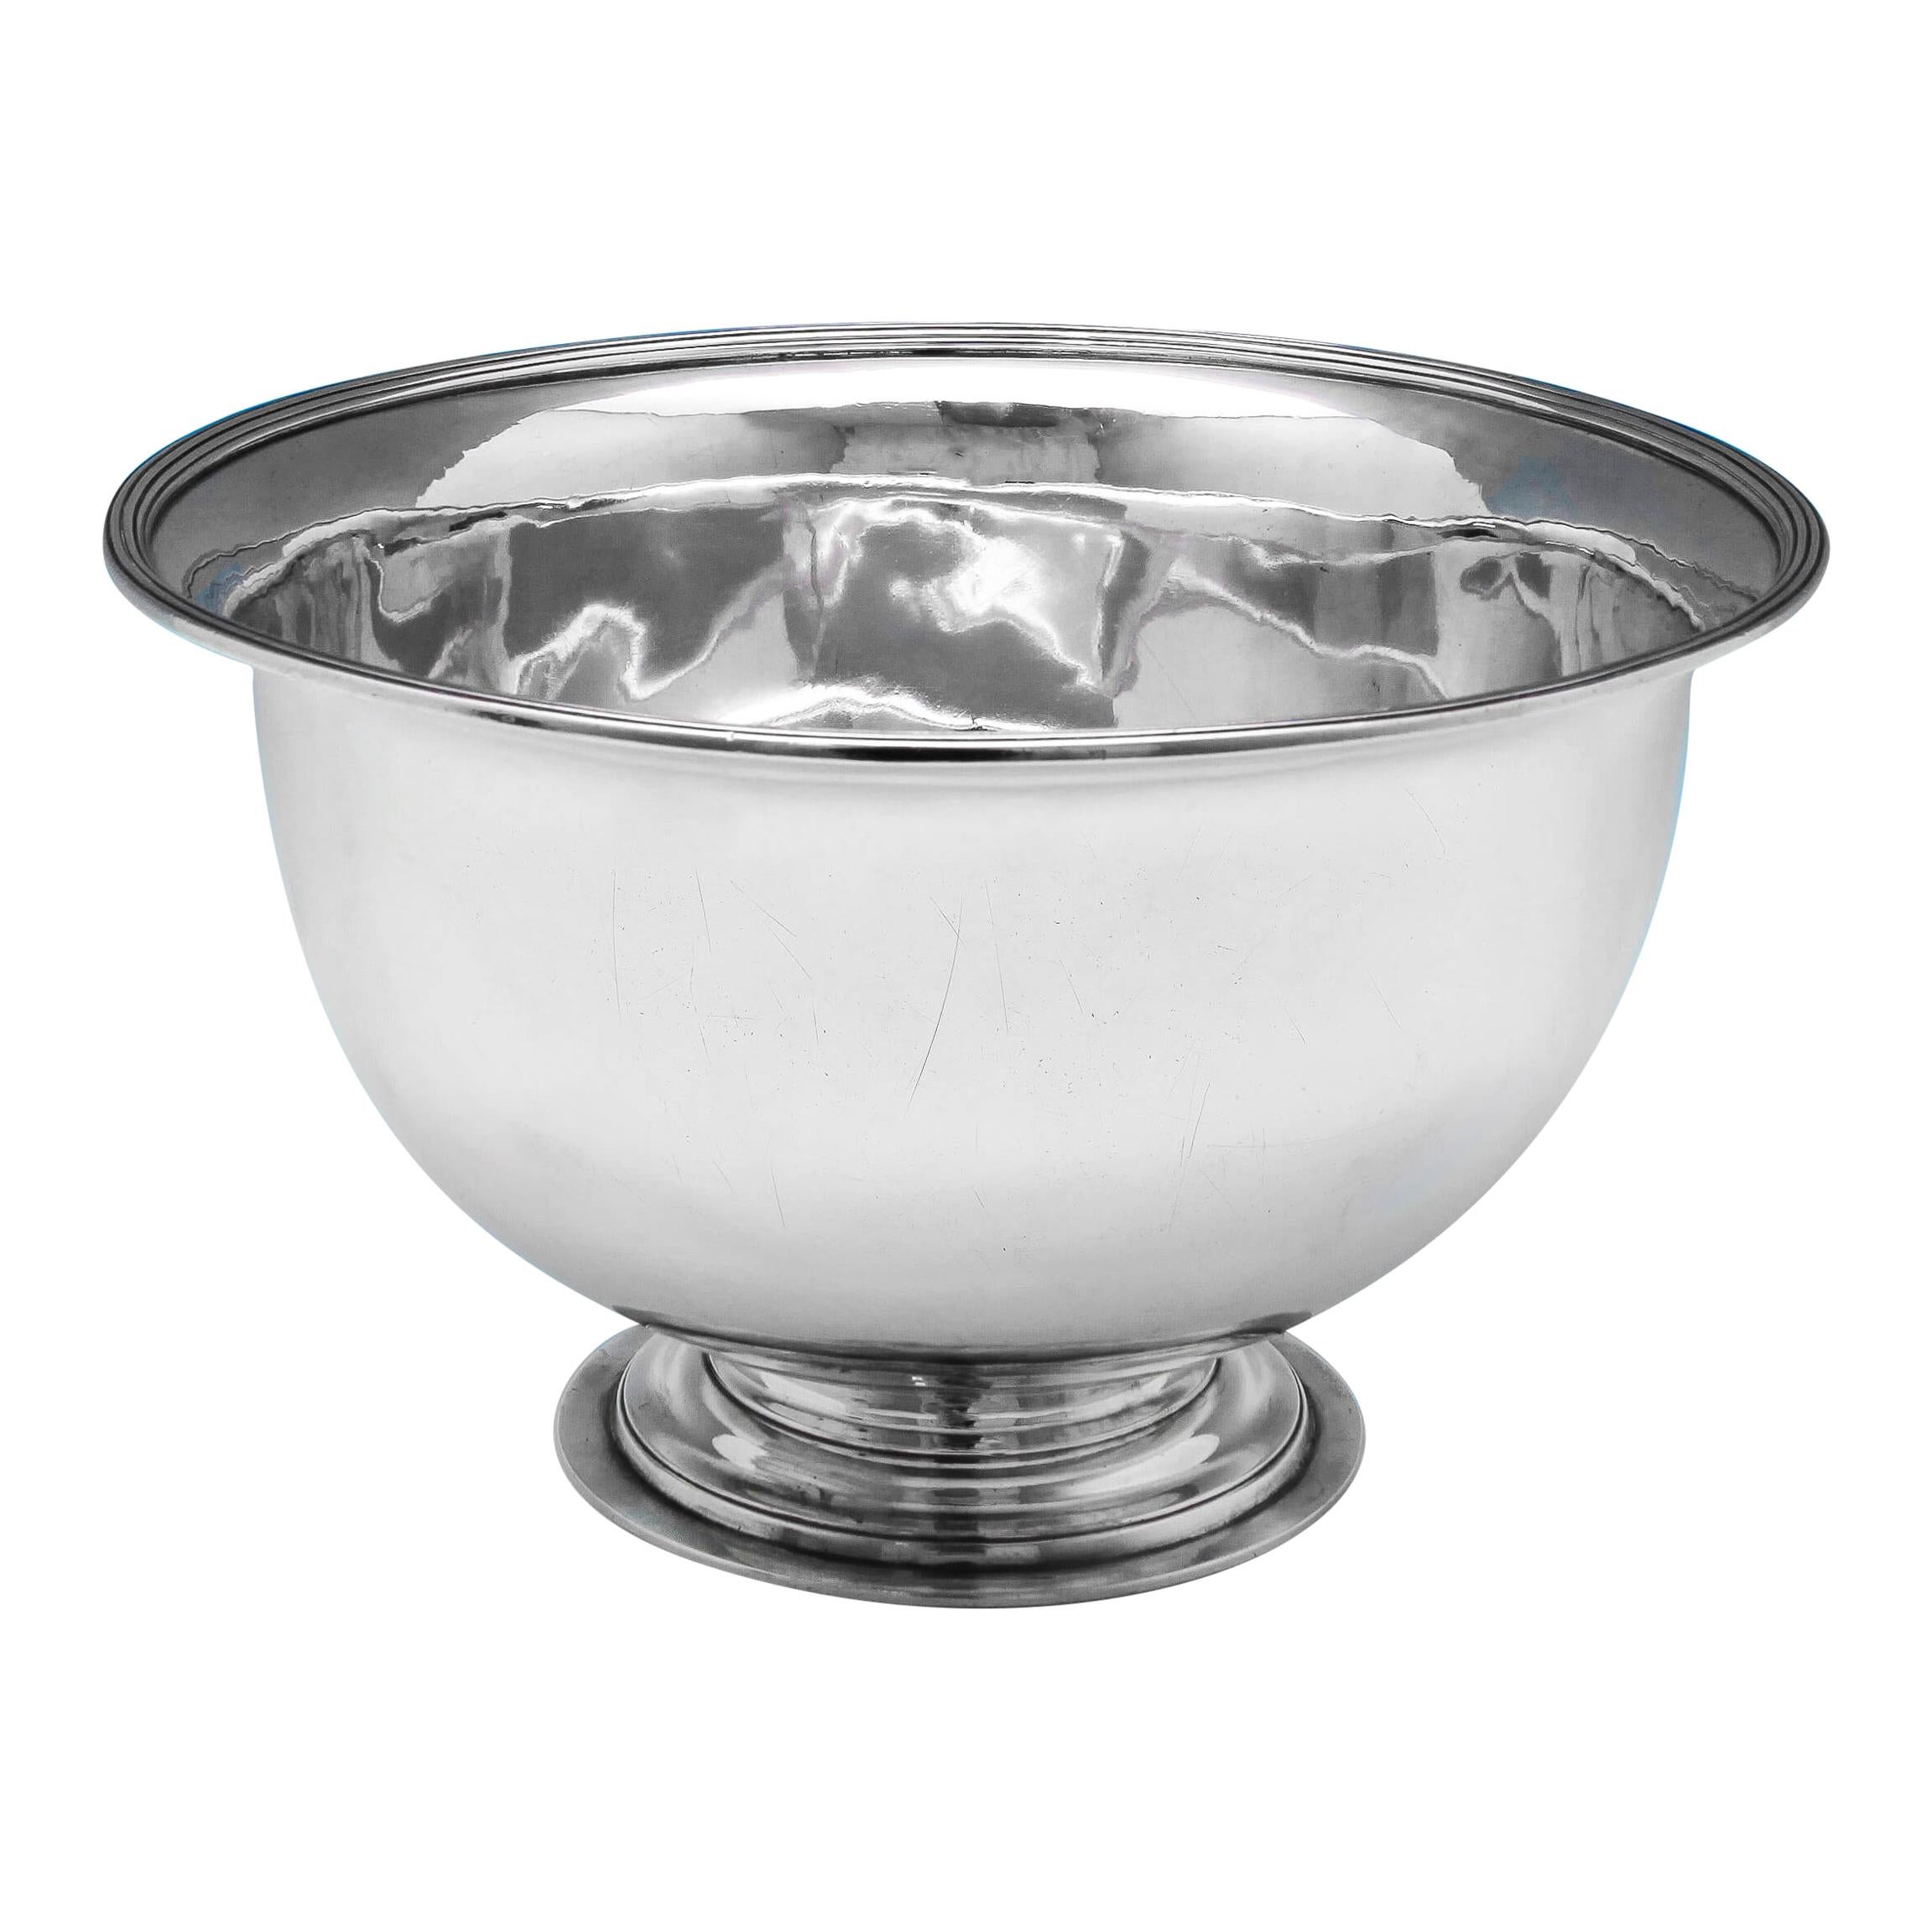 Paul Storr Antique Sterling Silver Bowl from 1798